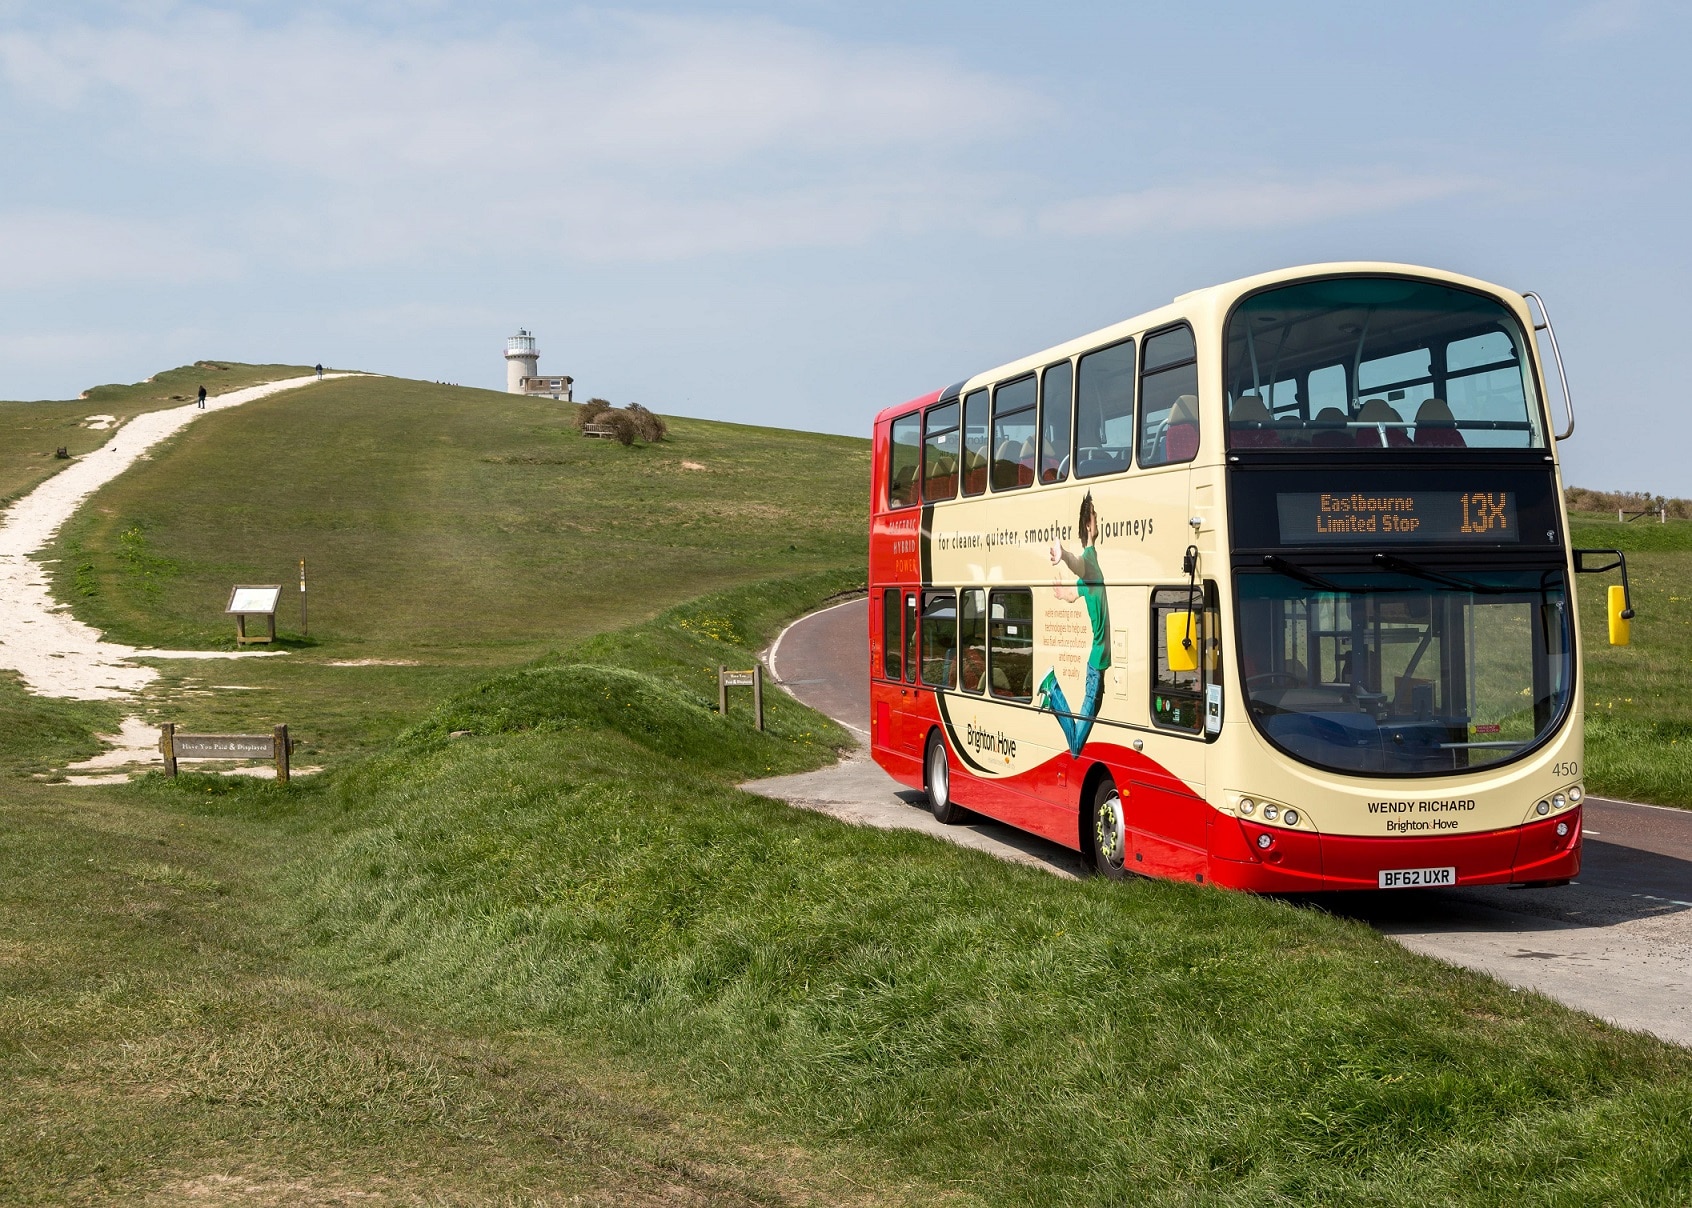 Bus network review guidance published by DfT